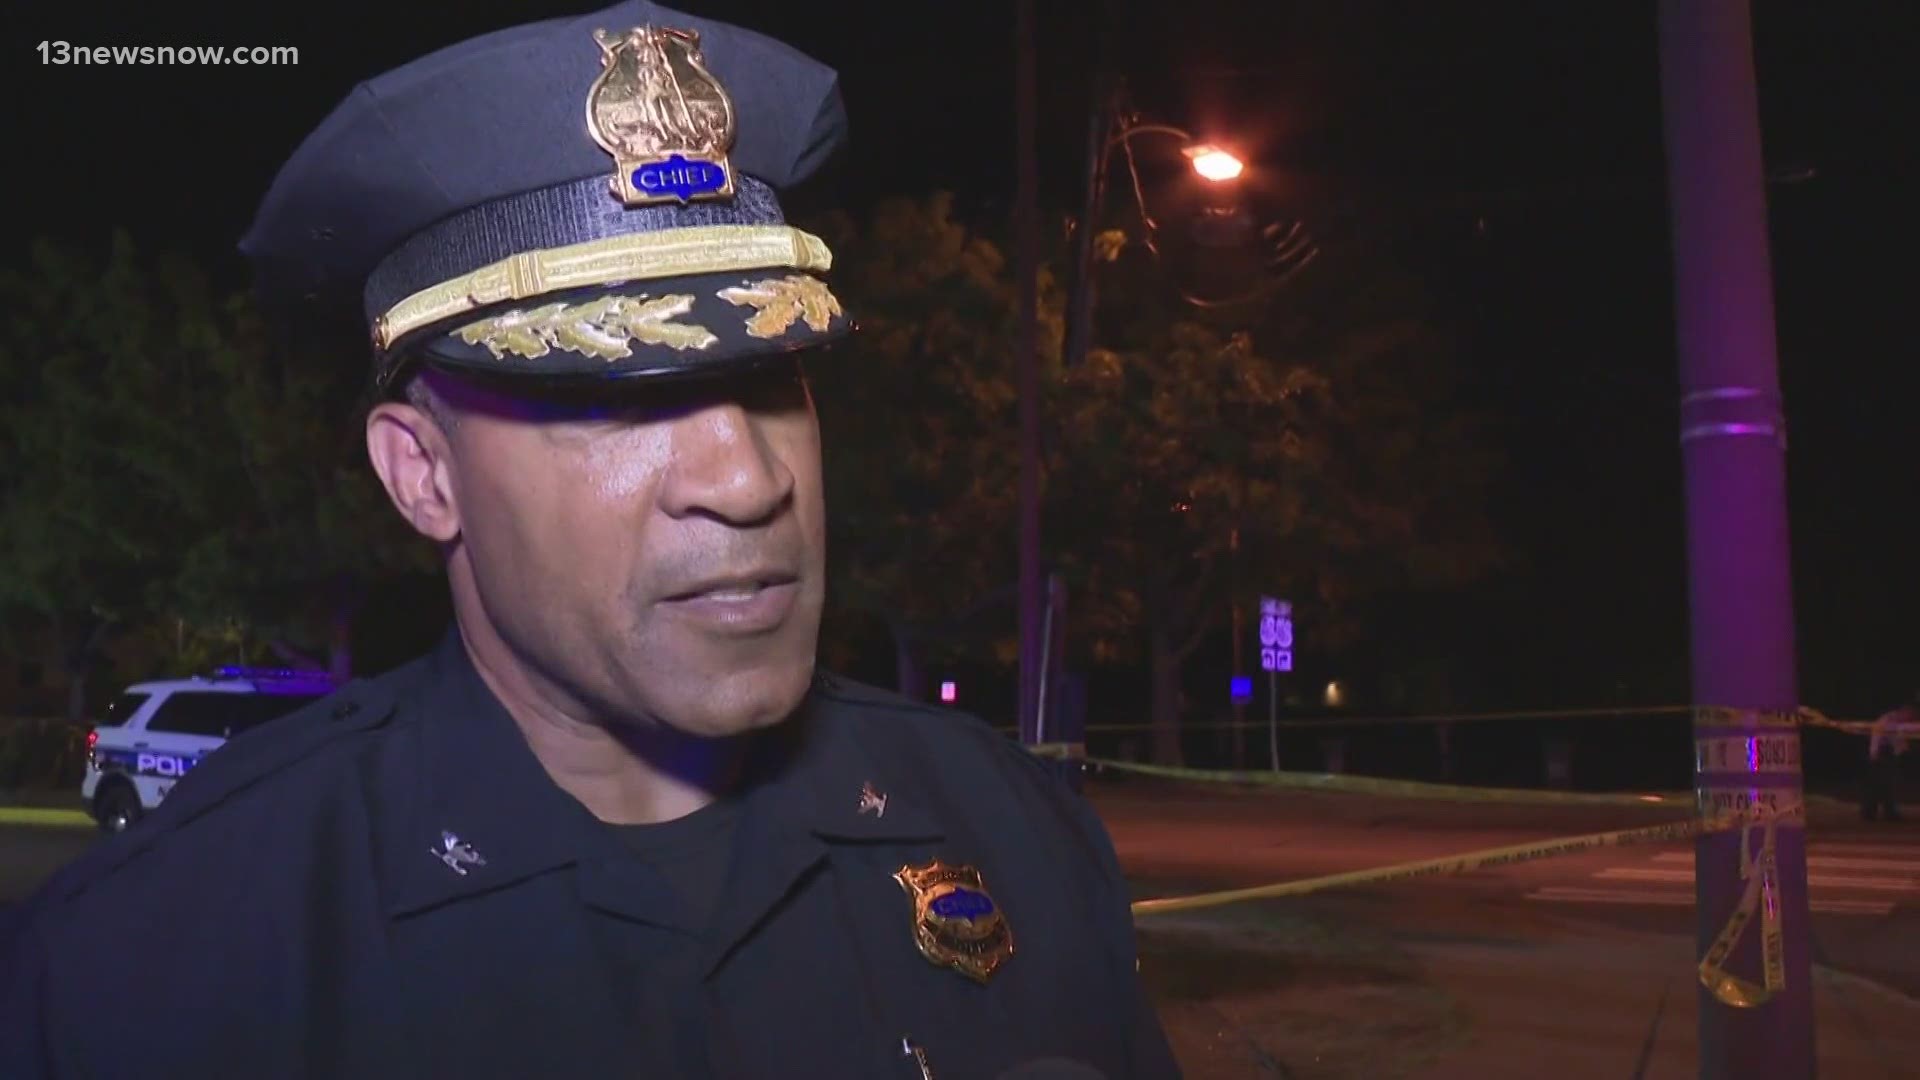 Norfolk Police Chief Larry Boone had powerful words for the community.